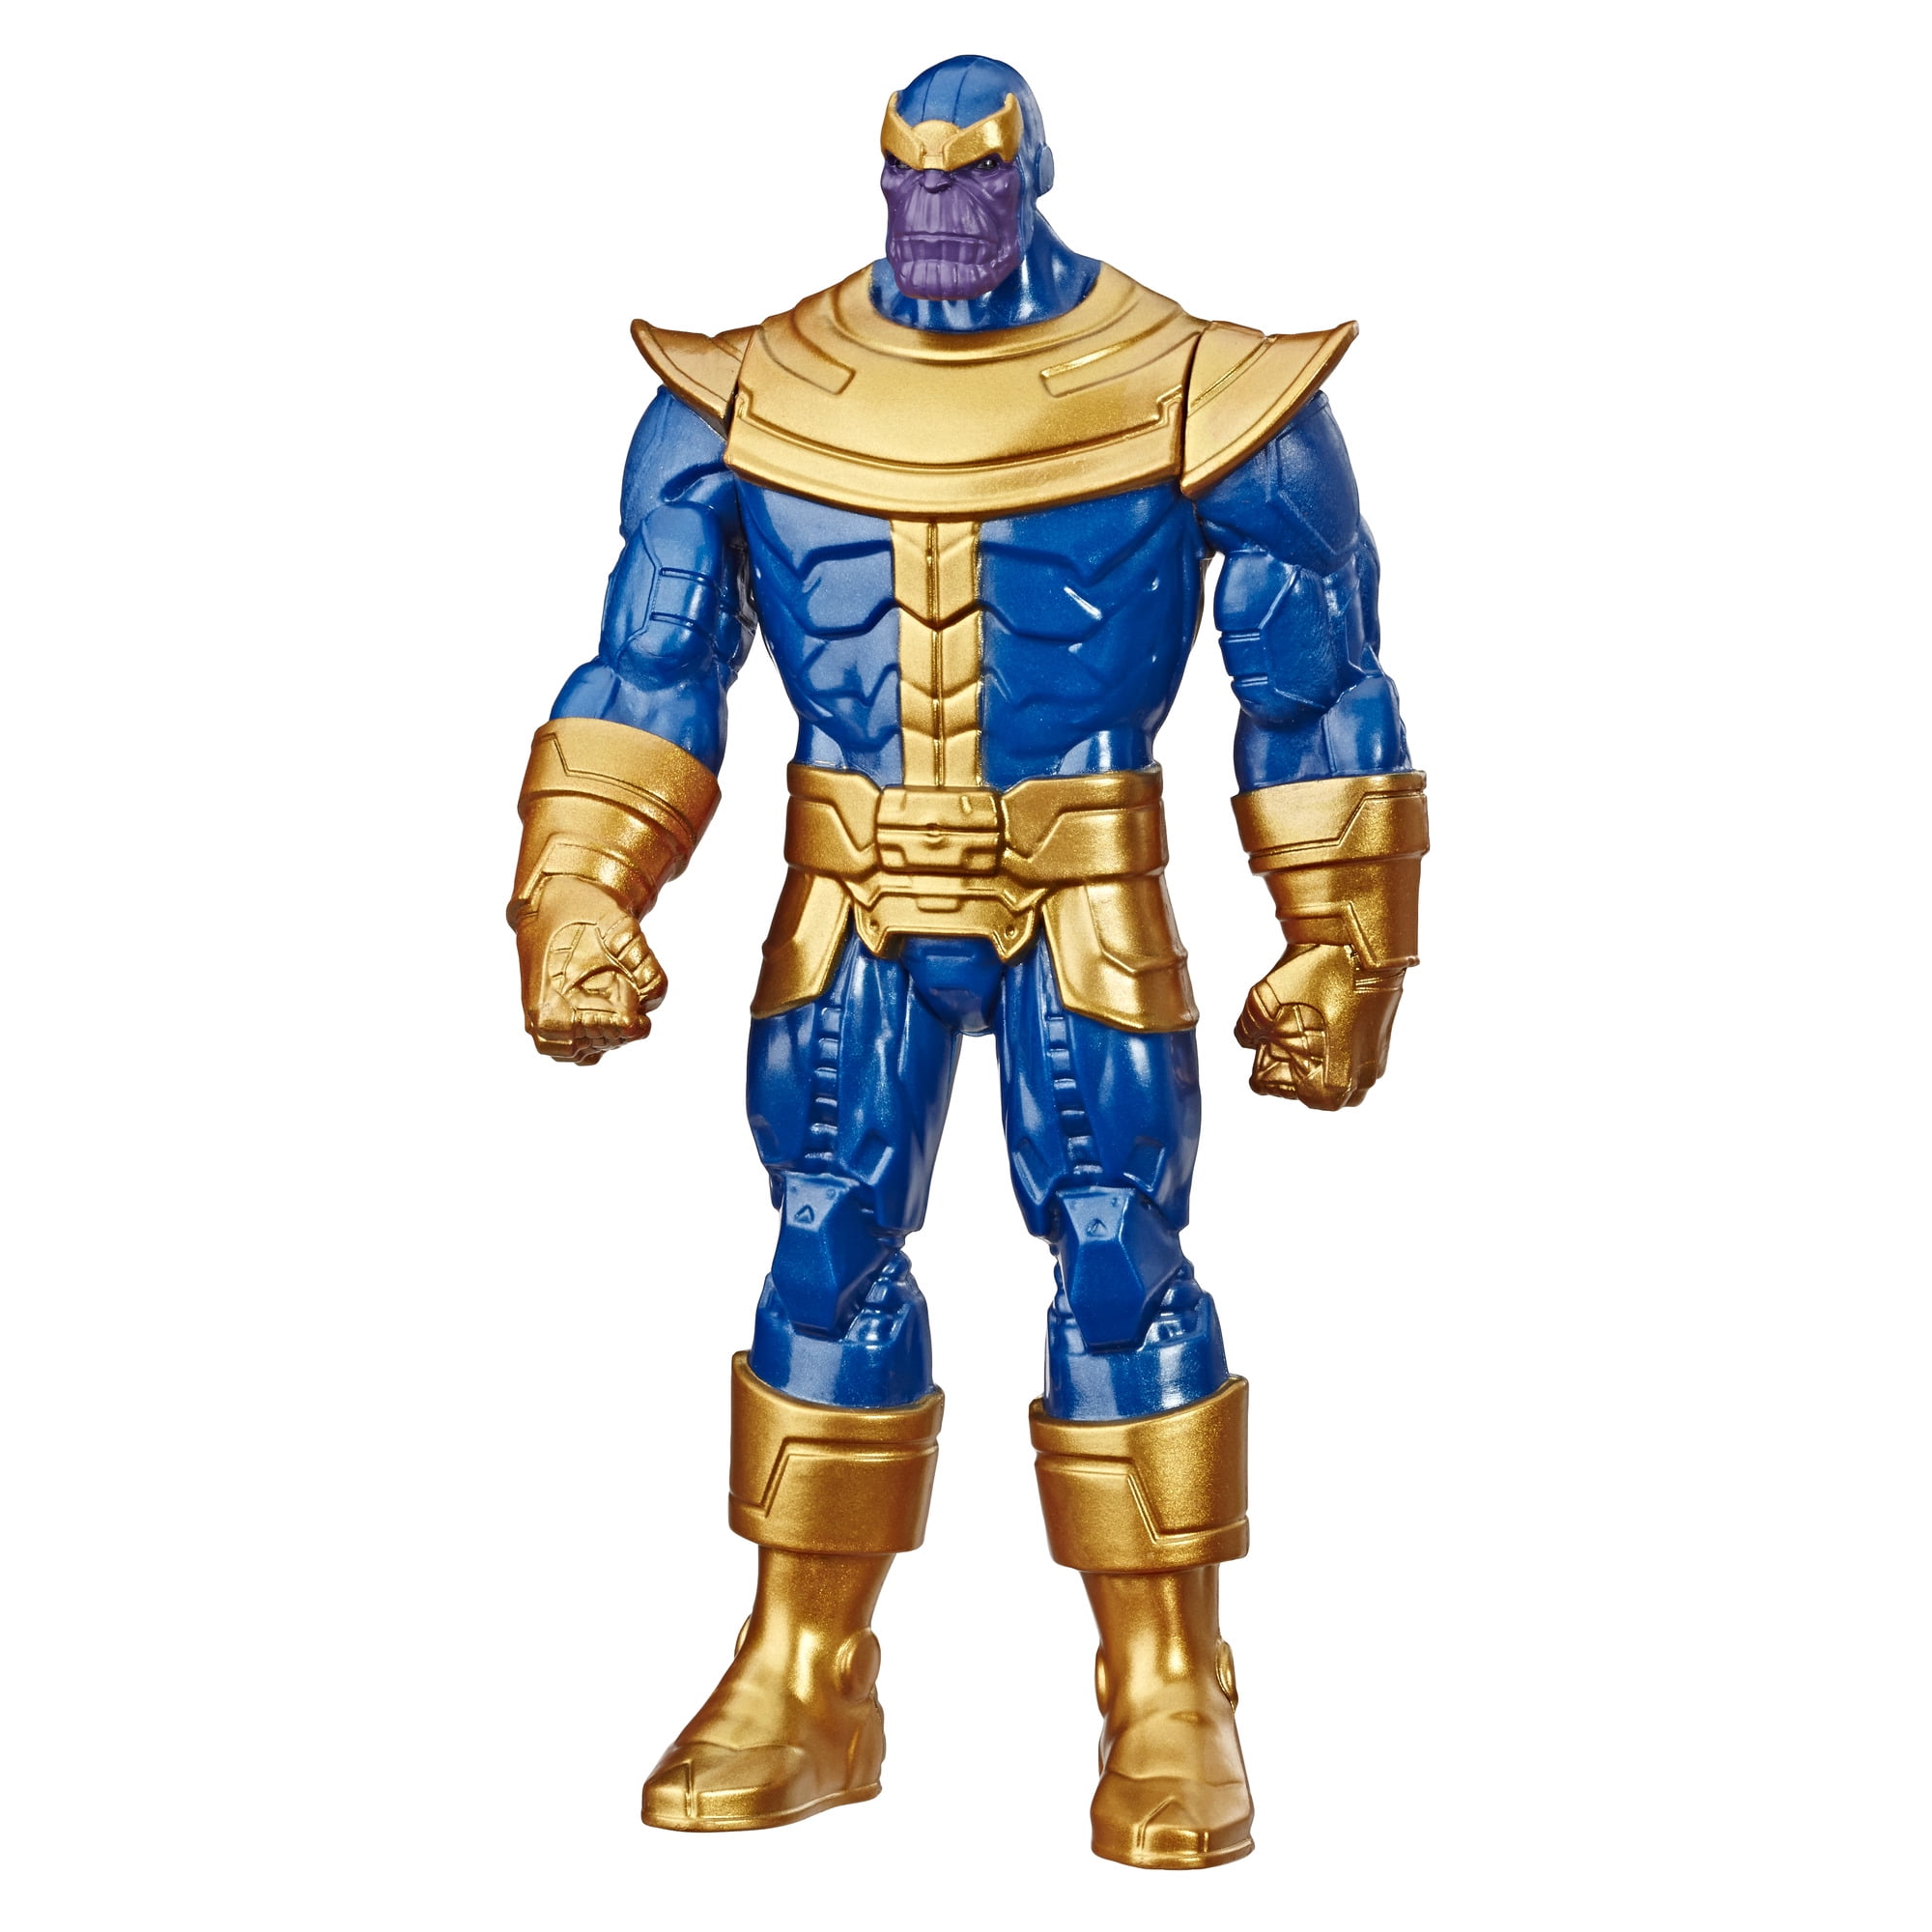 Malvel Avengers End Game Thanos Action Figure Toy Hero 6 Inch Free Shipping 